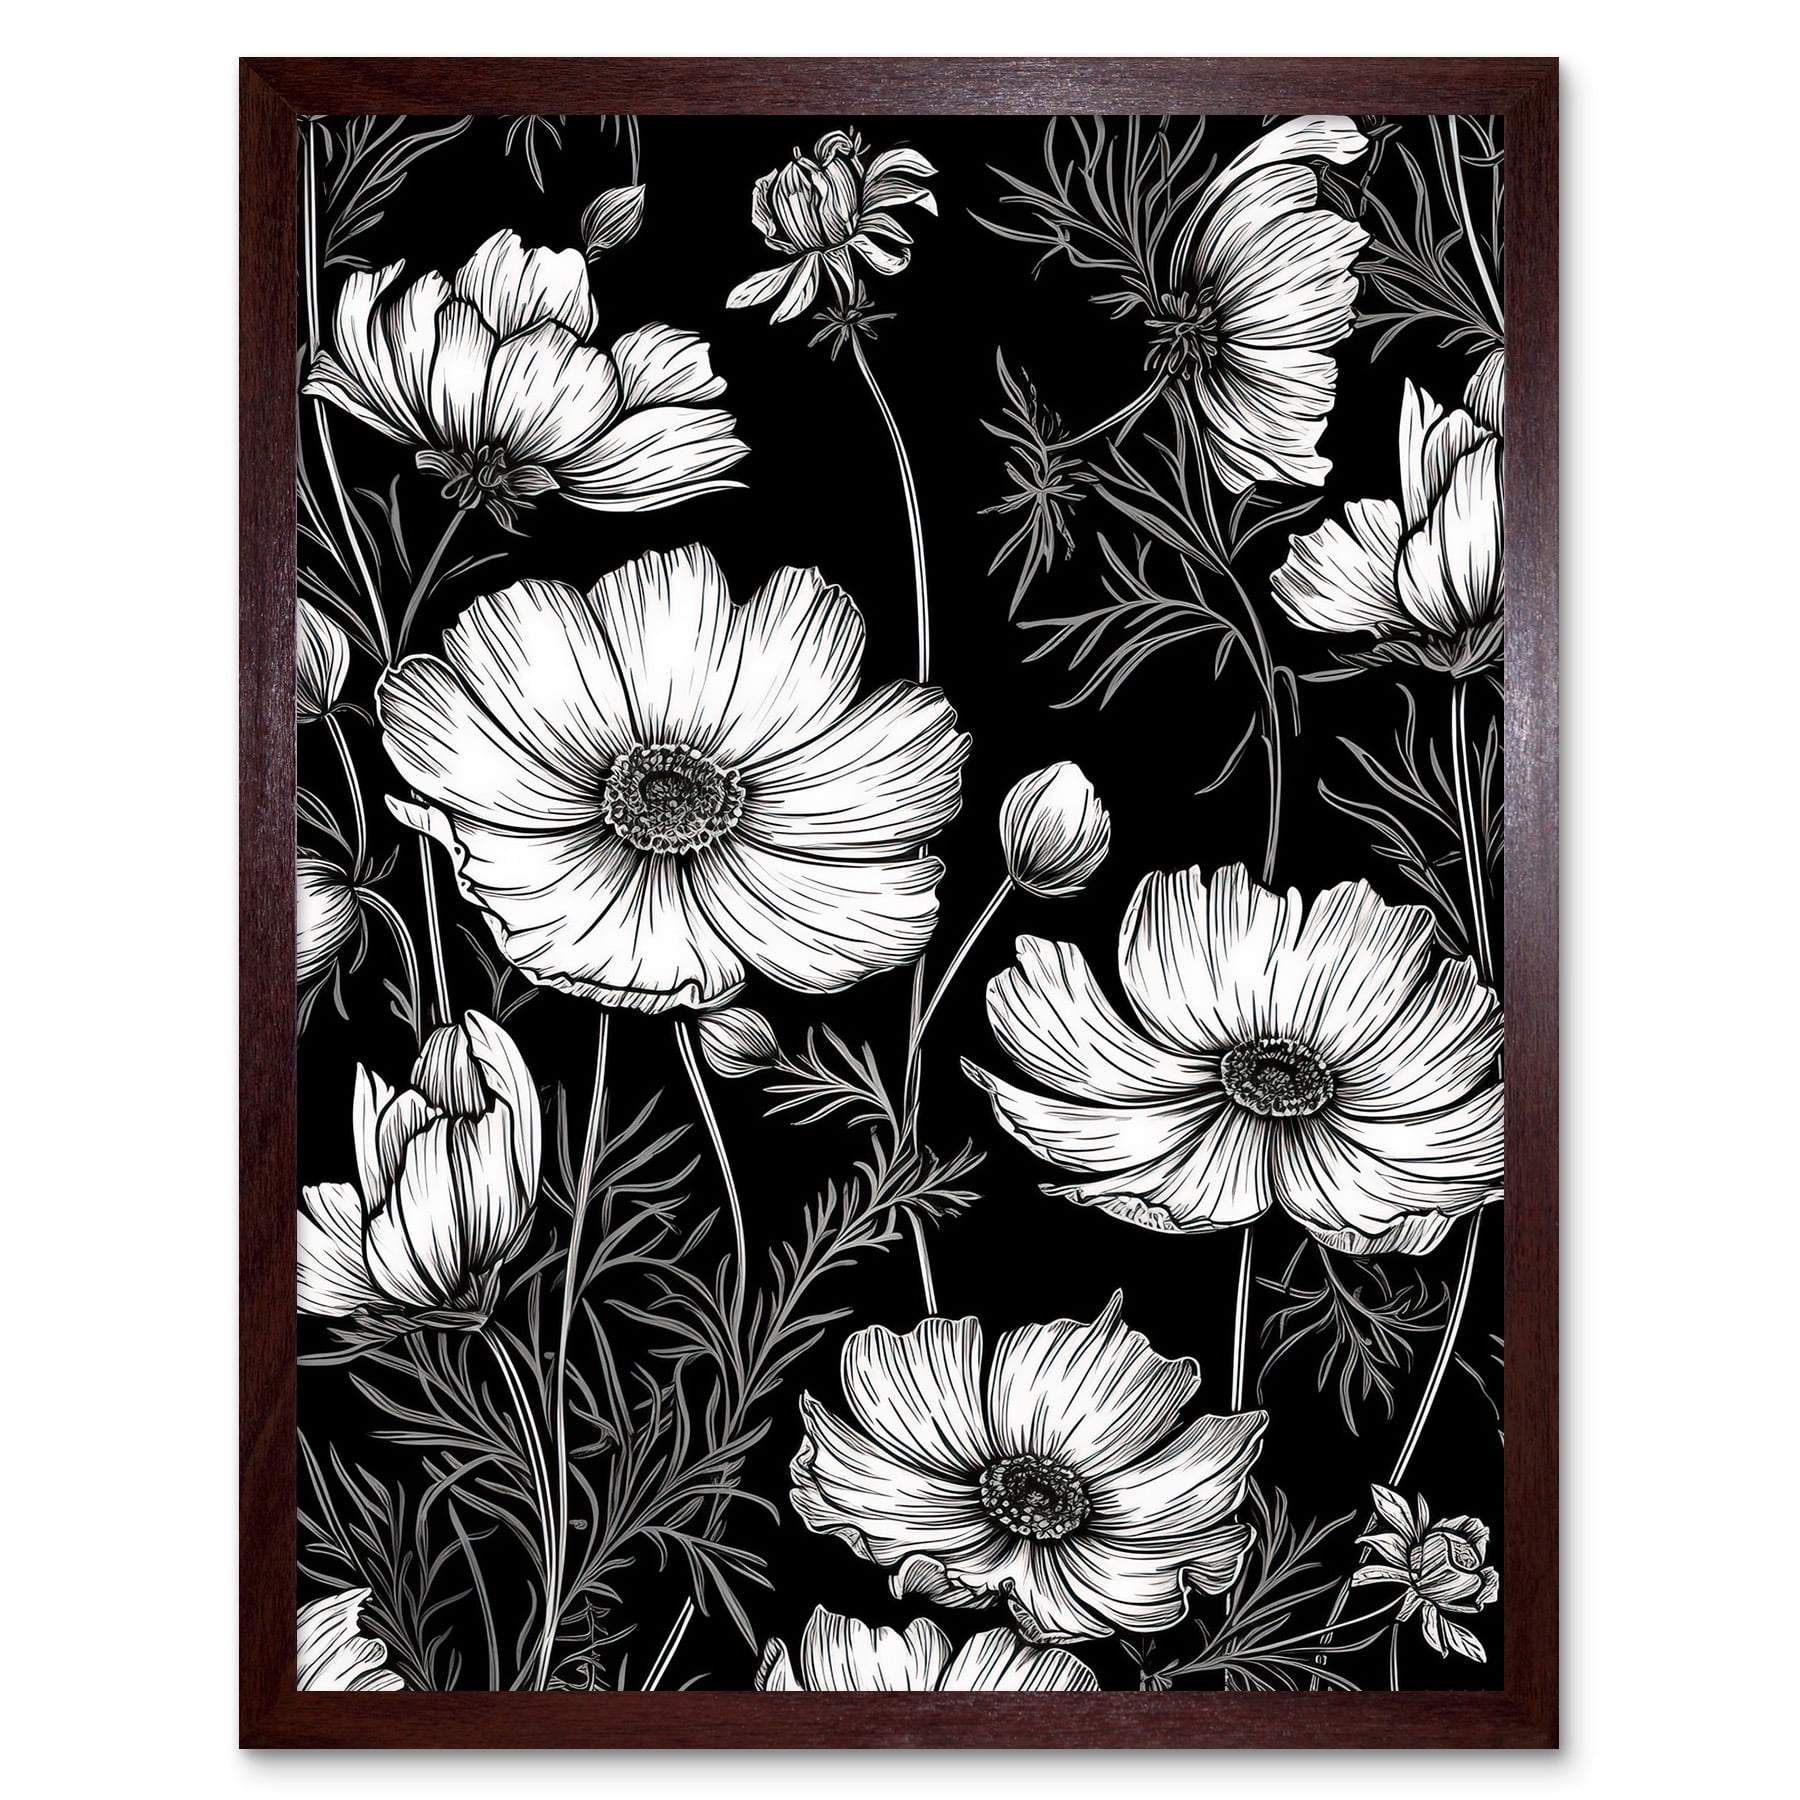 Detailed Black and White Cosmos Flower Plants Large Wall Art Poster Print  Thick Paper 18X24 Inch